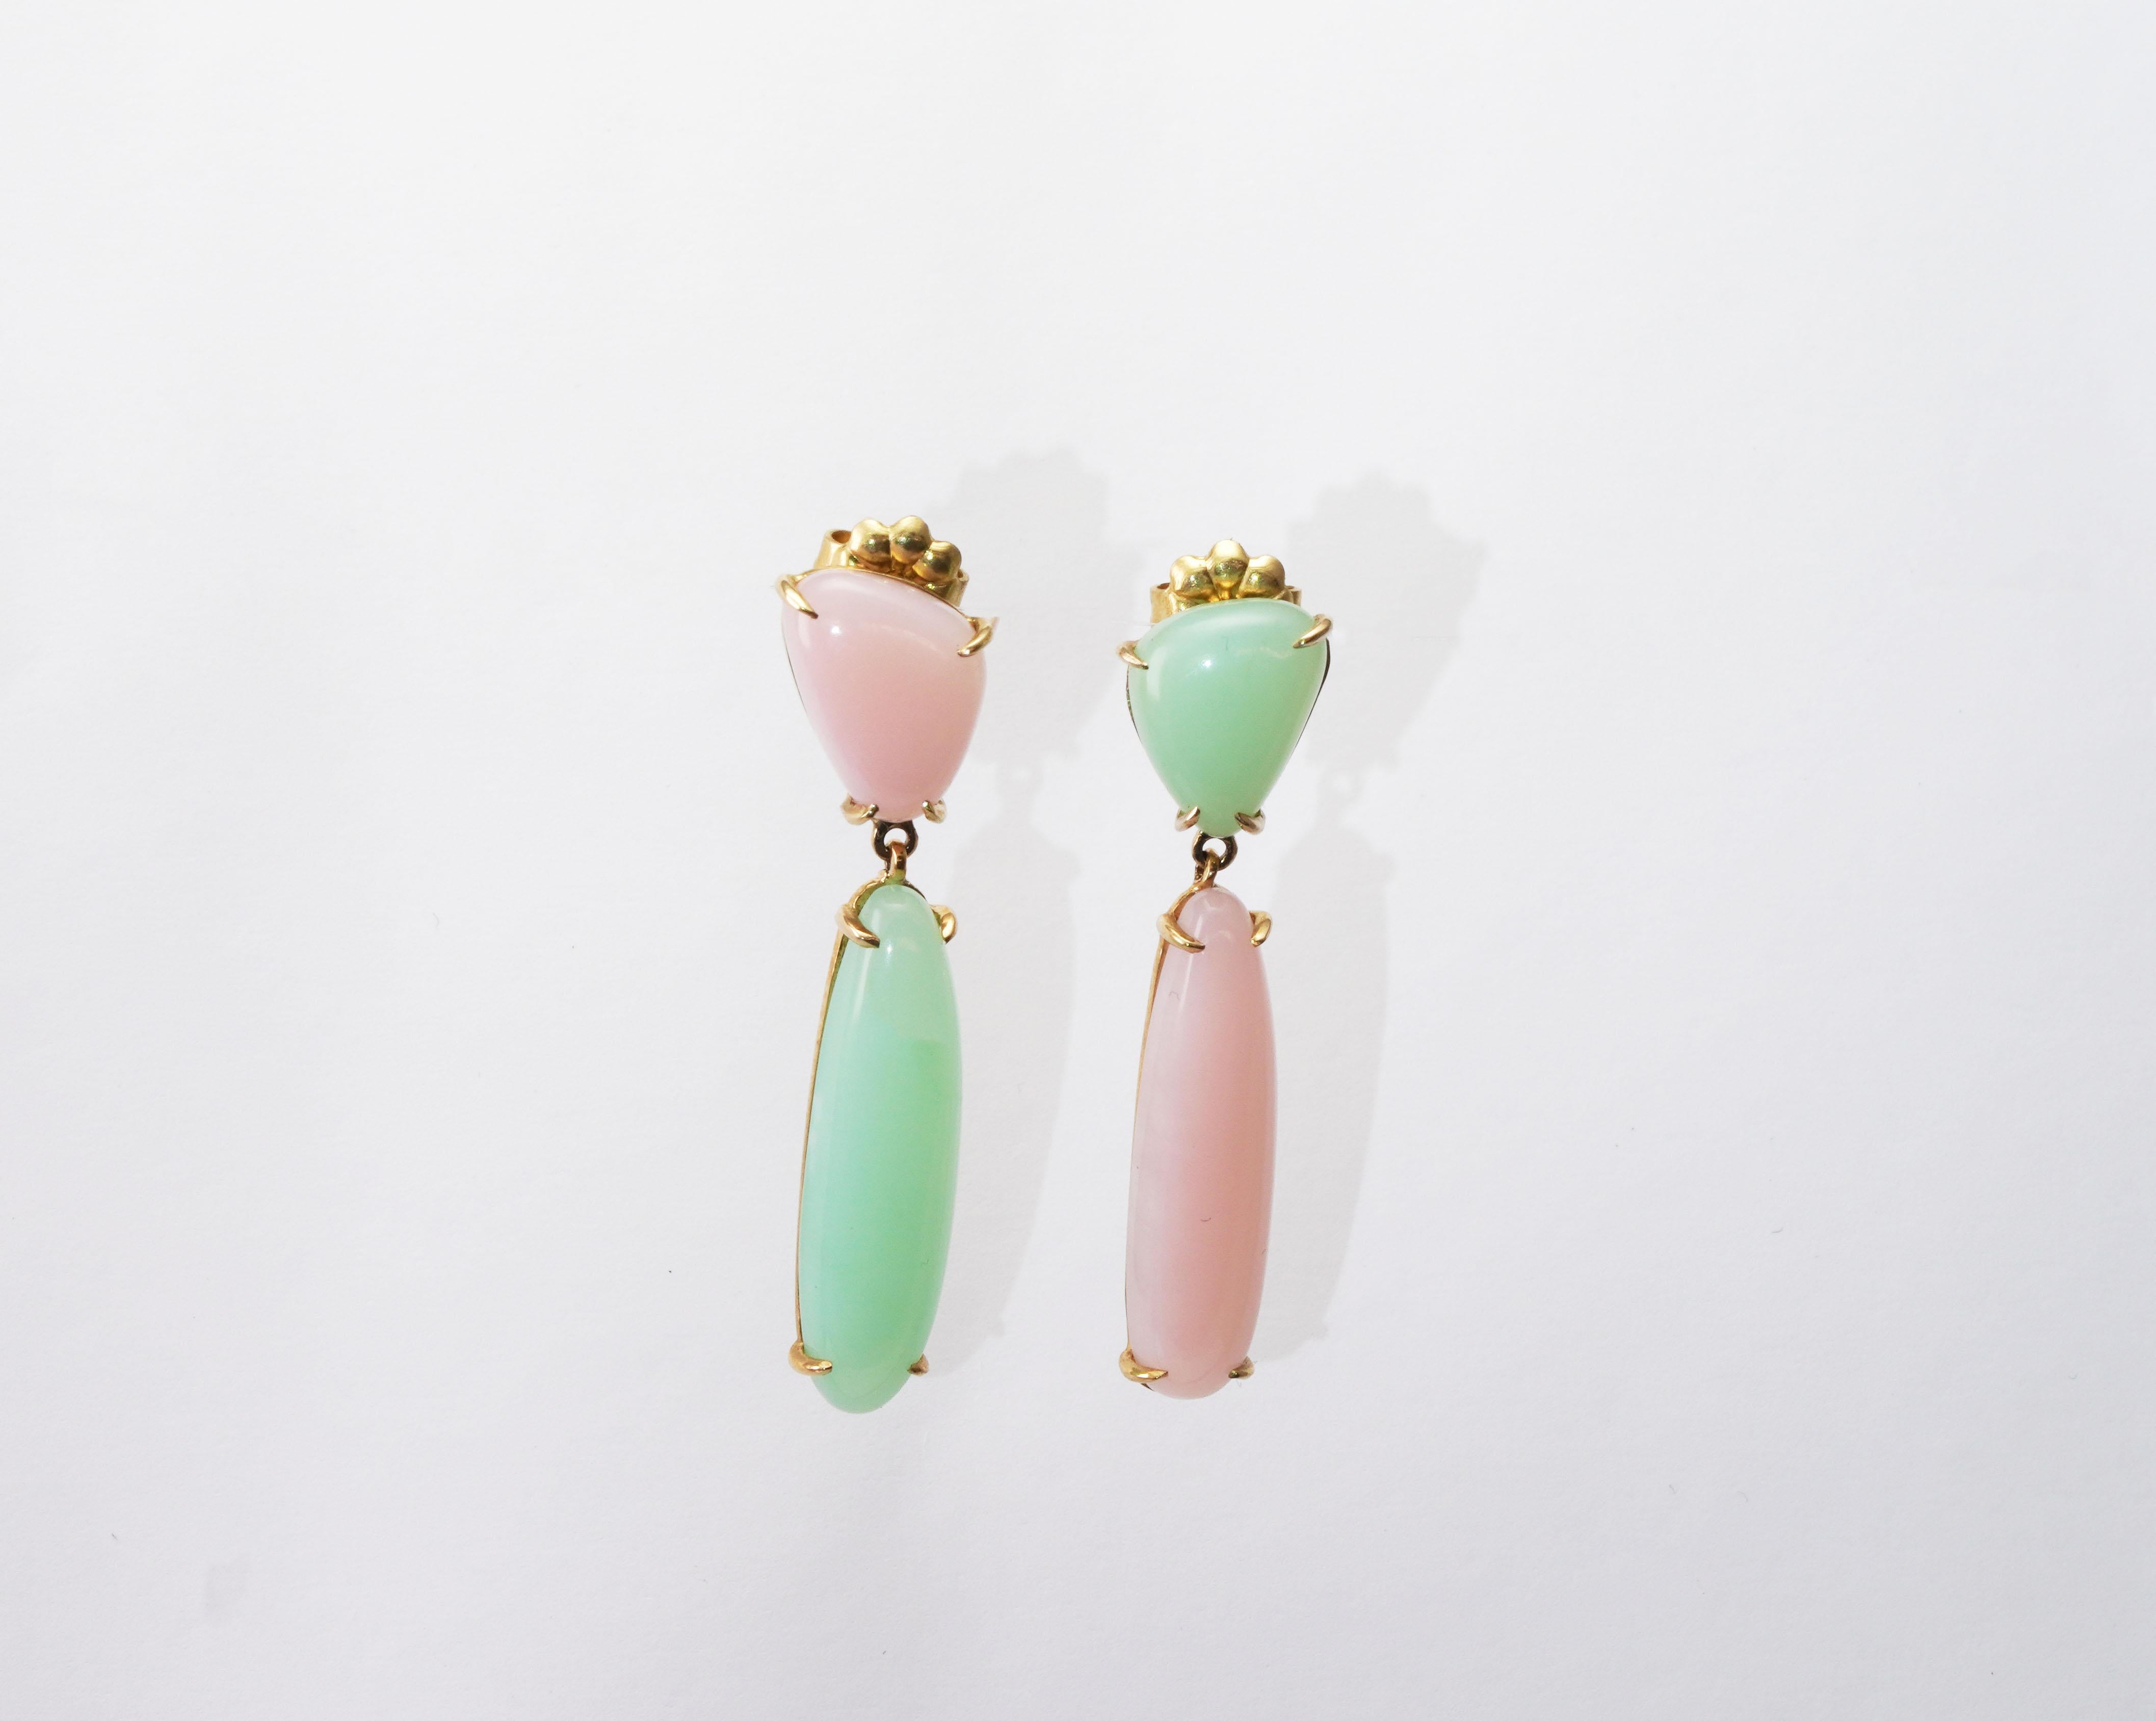 14 kt gold pair of earrings with Chrysopal and Rose Opal
Gold color: Yellow
Dimensions: 
Total weight: 4.18 grams

Set with:
- Chrysopal
Cut: Cabochon
Colour: Green

- Rose Opal
Cut: Cabochon
Colour: Rose